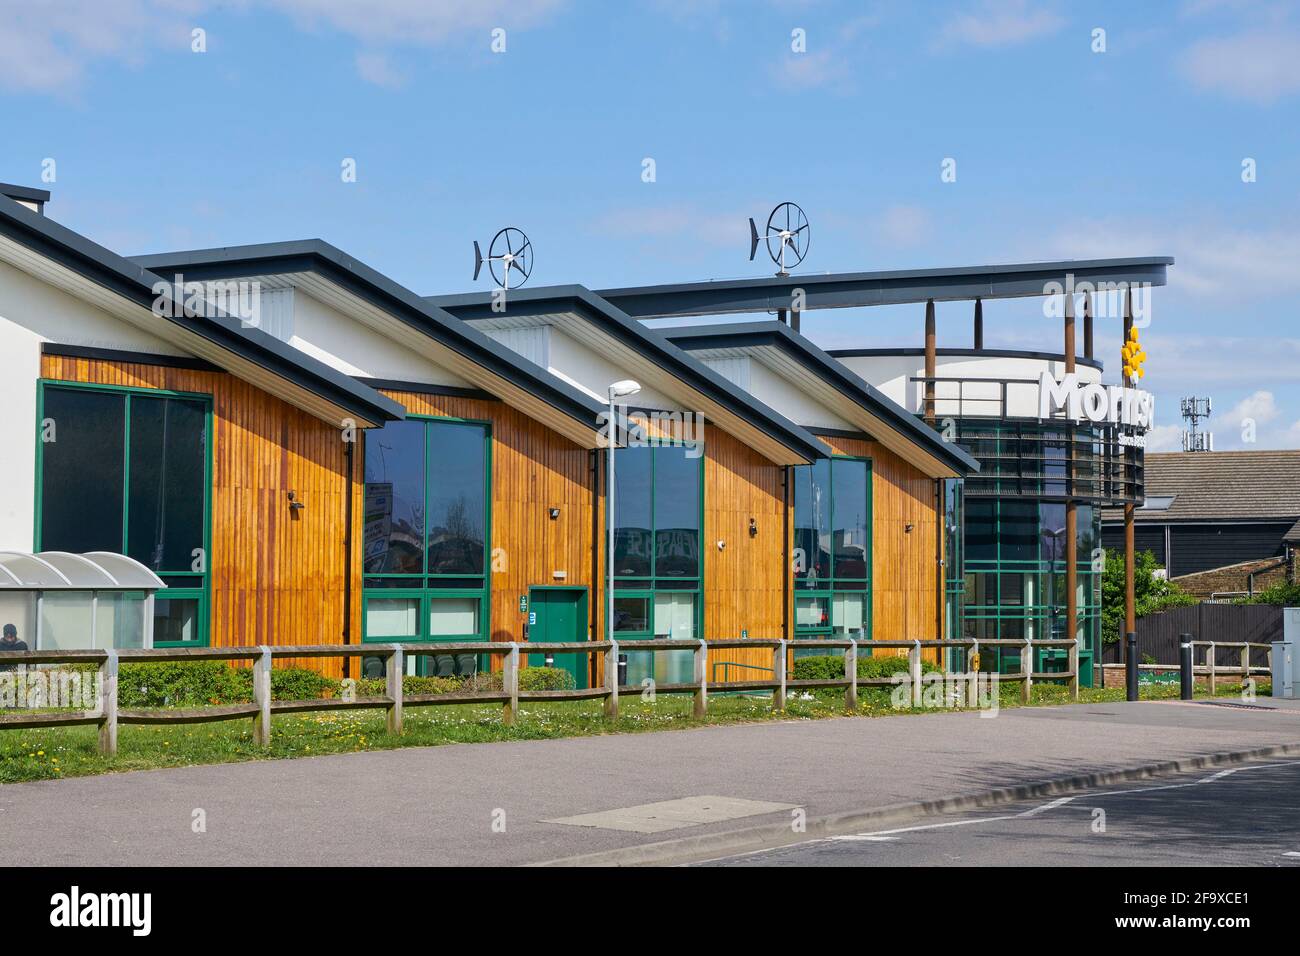 The modern architecture of the new Morrisons supermarket at Sittingbourne Kent, south east England, UK Stock Photo